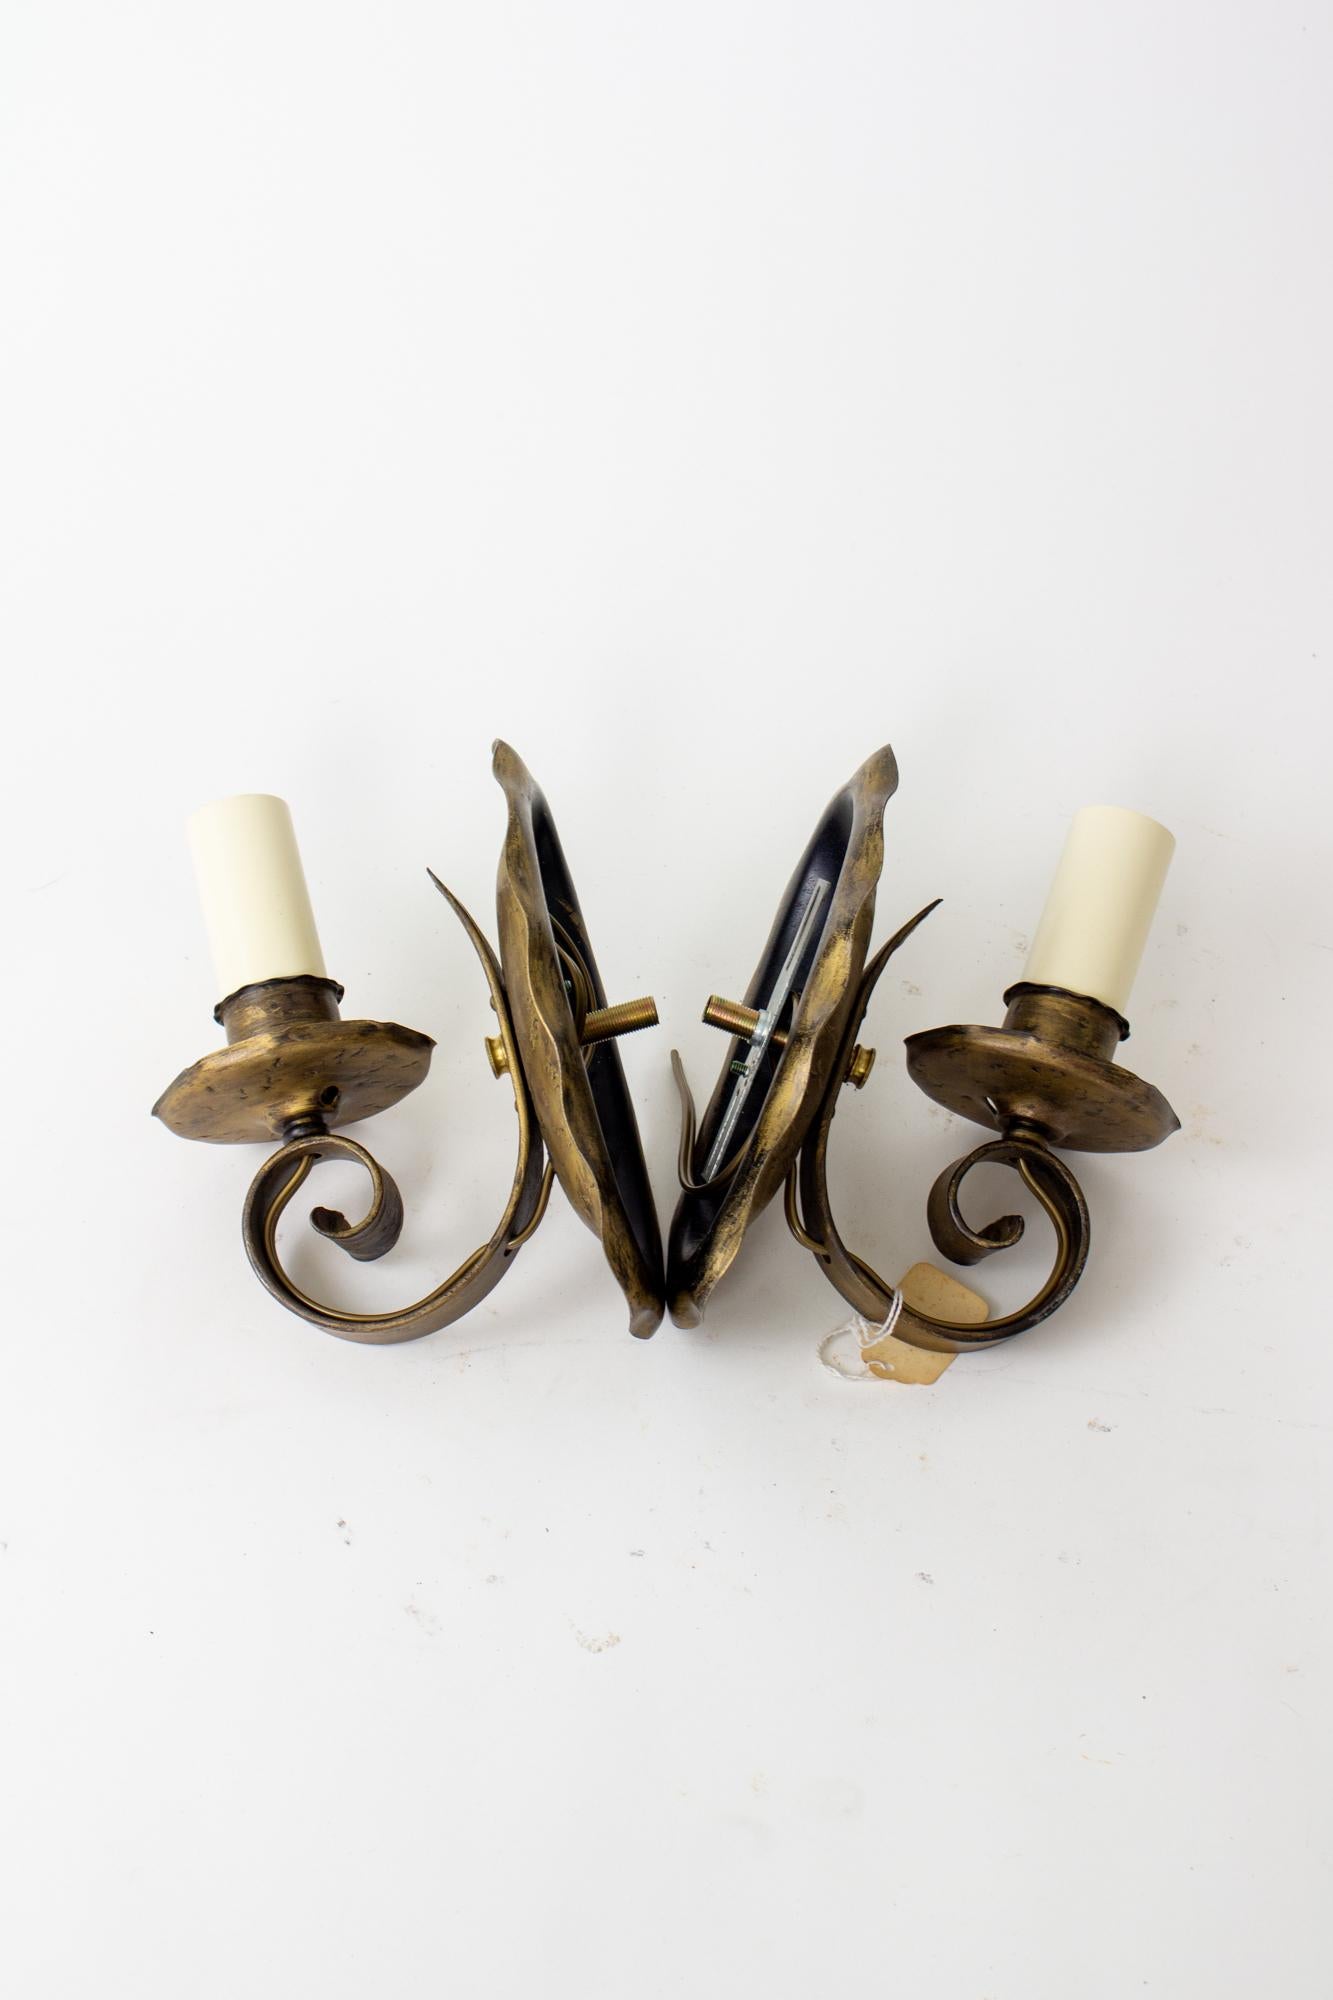 Metal Early 20th Century Antique Gold Oval Sconces - a Pair For Sale